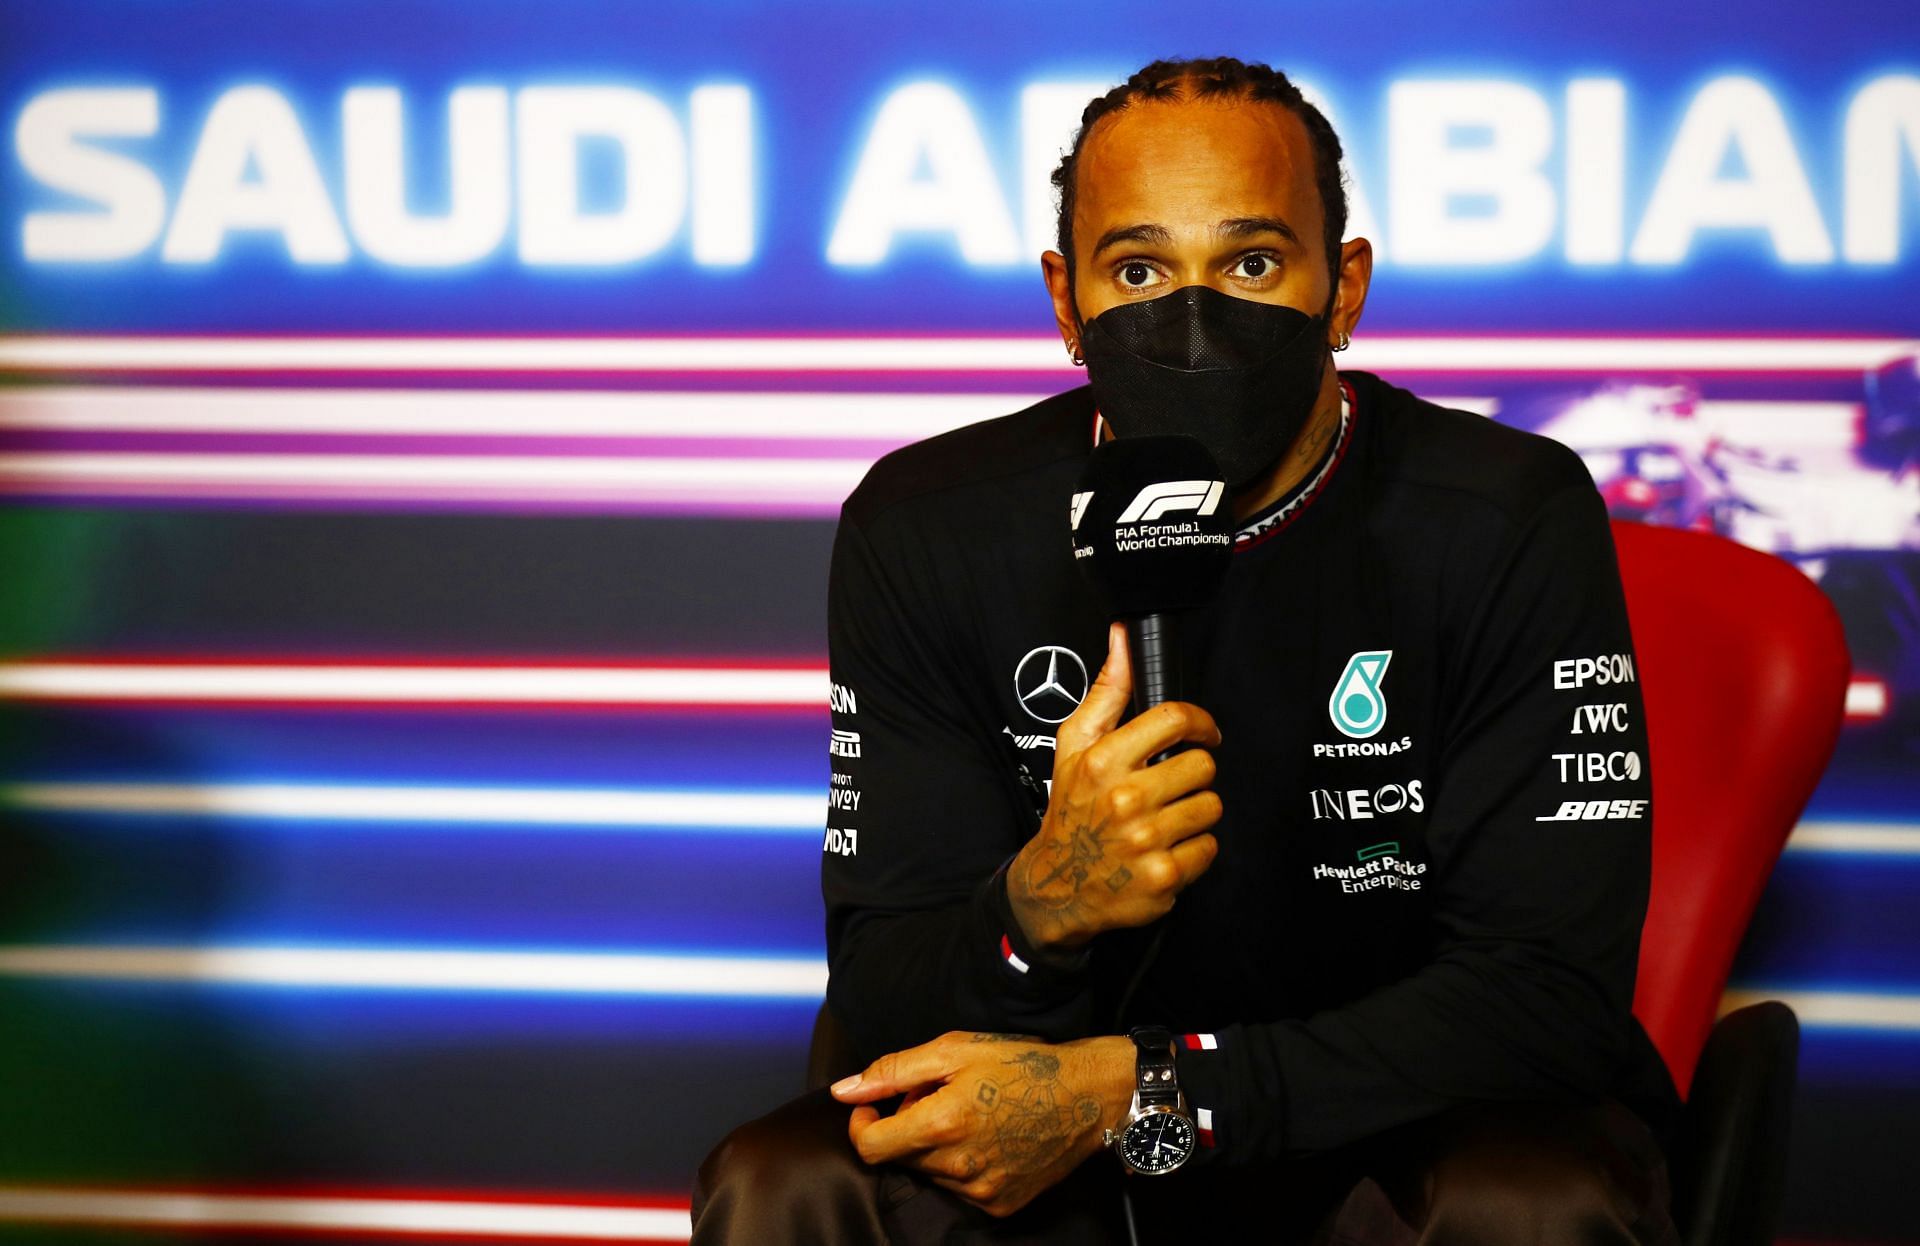 Lewis Hamilton speaks in the post-race press conference in Saudi Arabia. (Photo by Sam Bloxham - Pool/Getty Images)